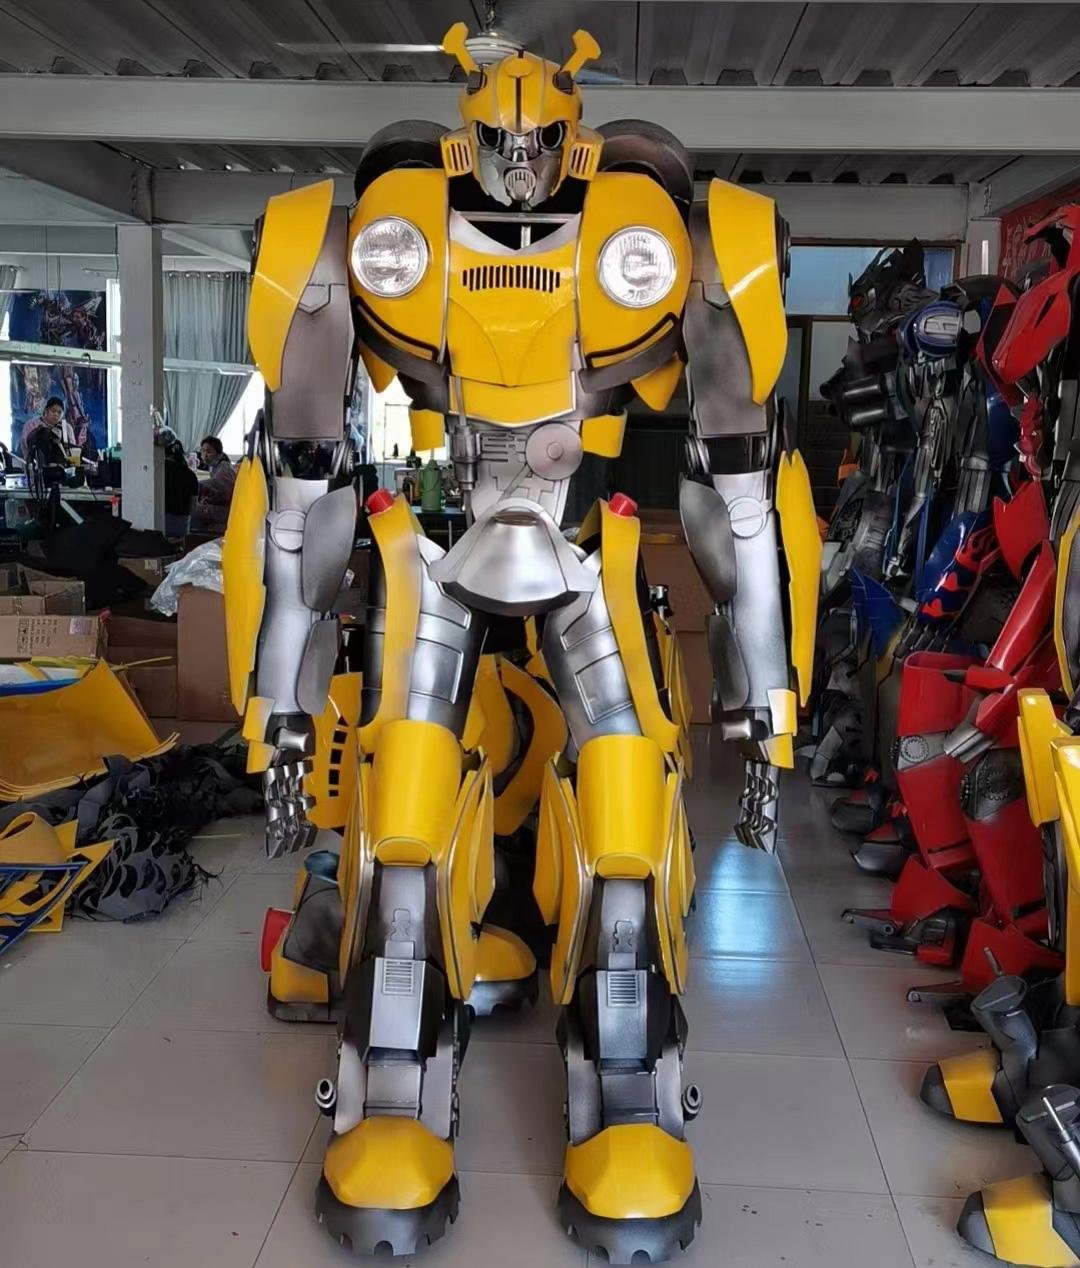 The Beatles cosplay transformers bumble bee robot costume 3